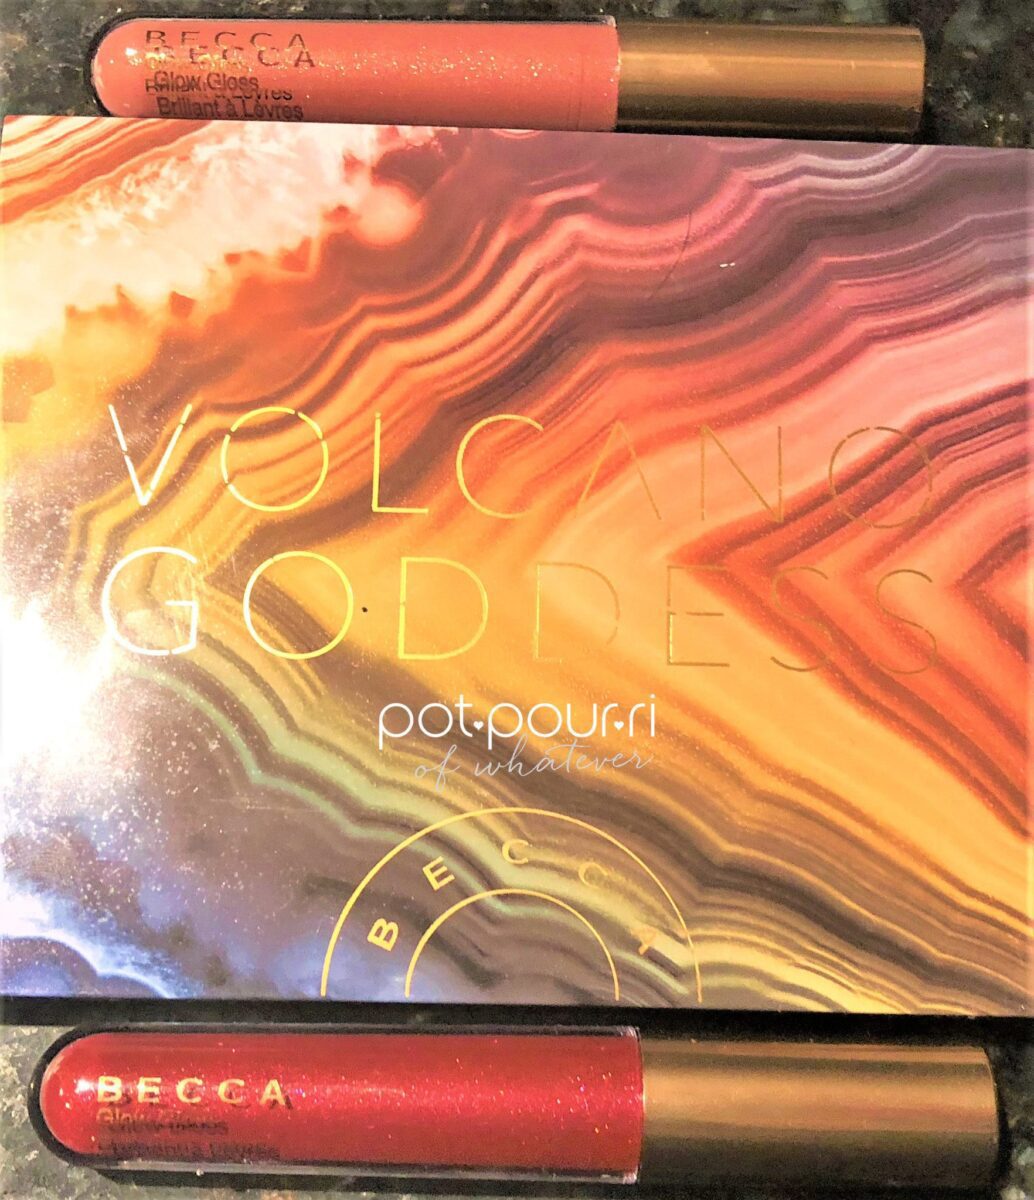 BECCA VOLCANO GODDESS PACKAGING EYE SHADOW PALETTE AND GLOW GLOSSES